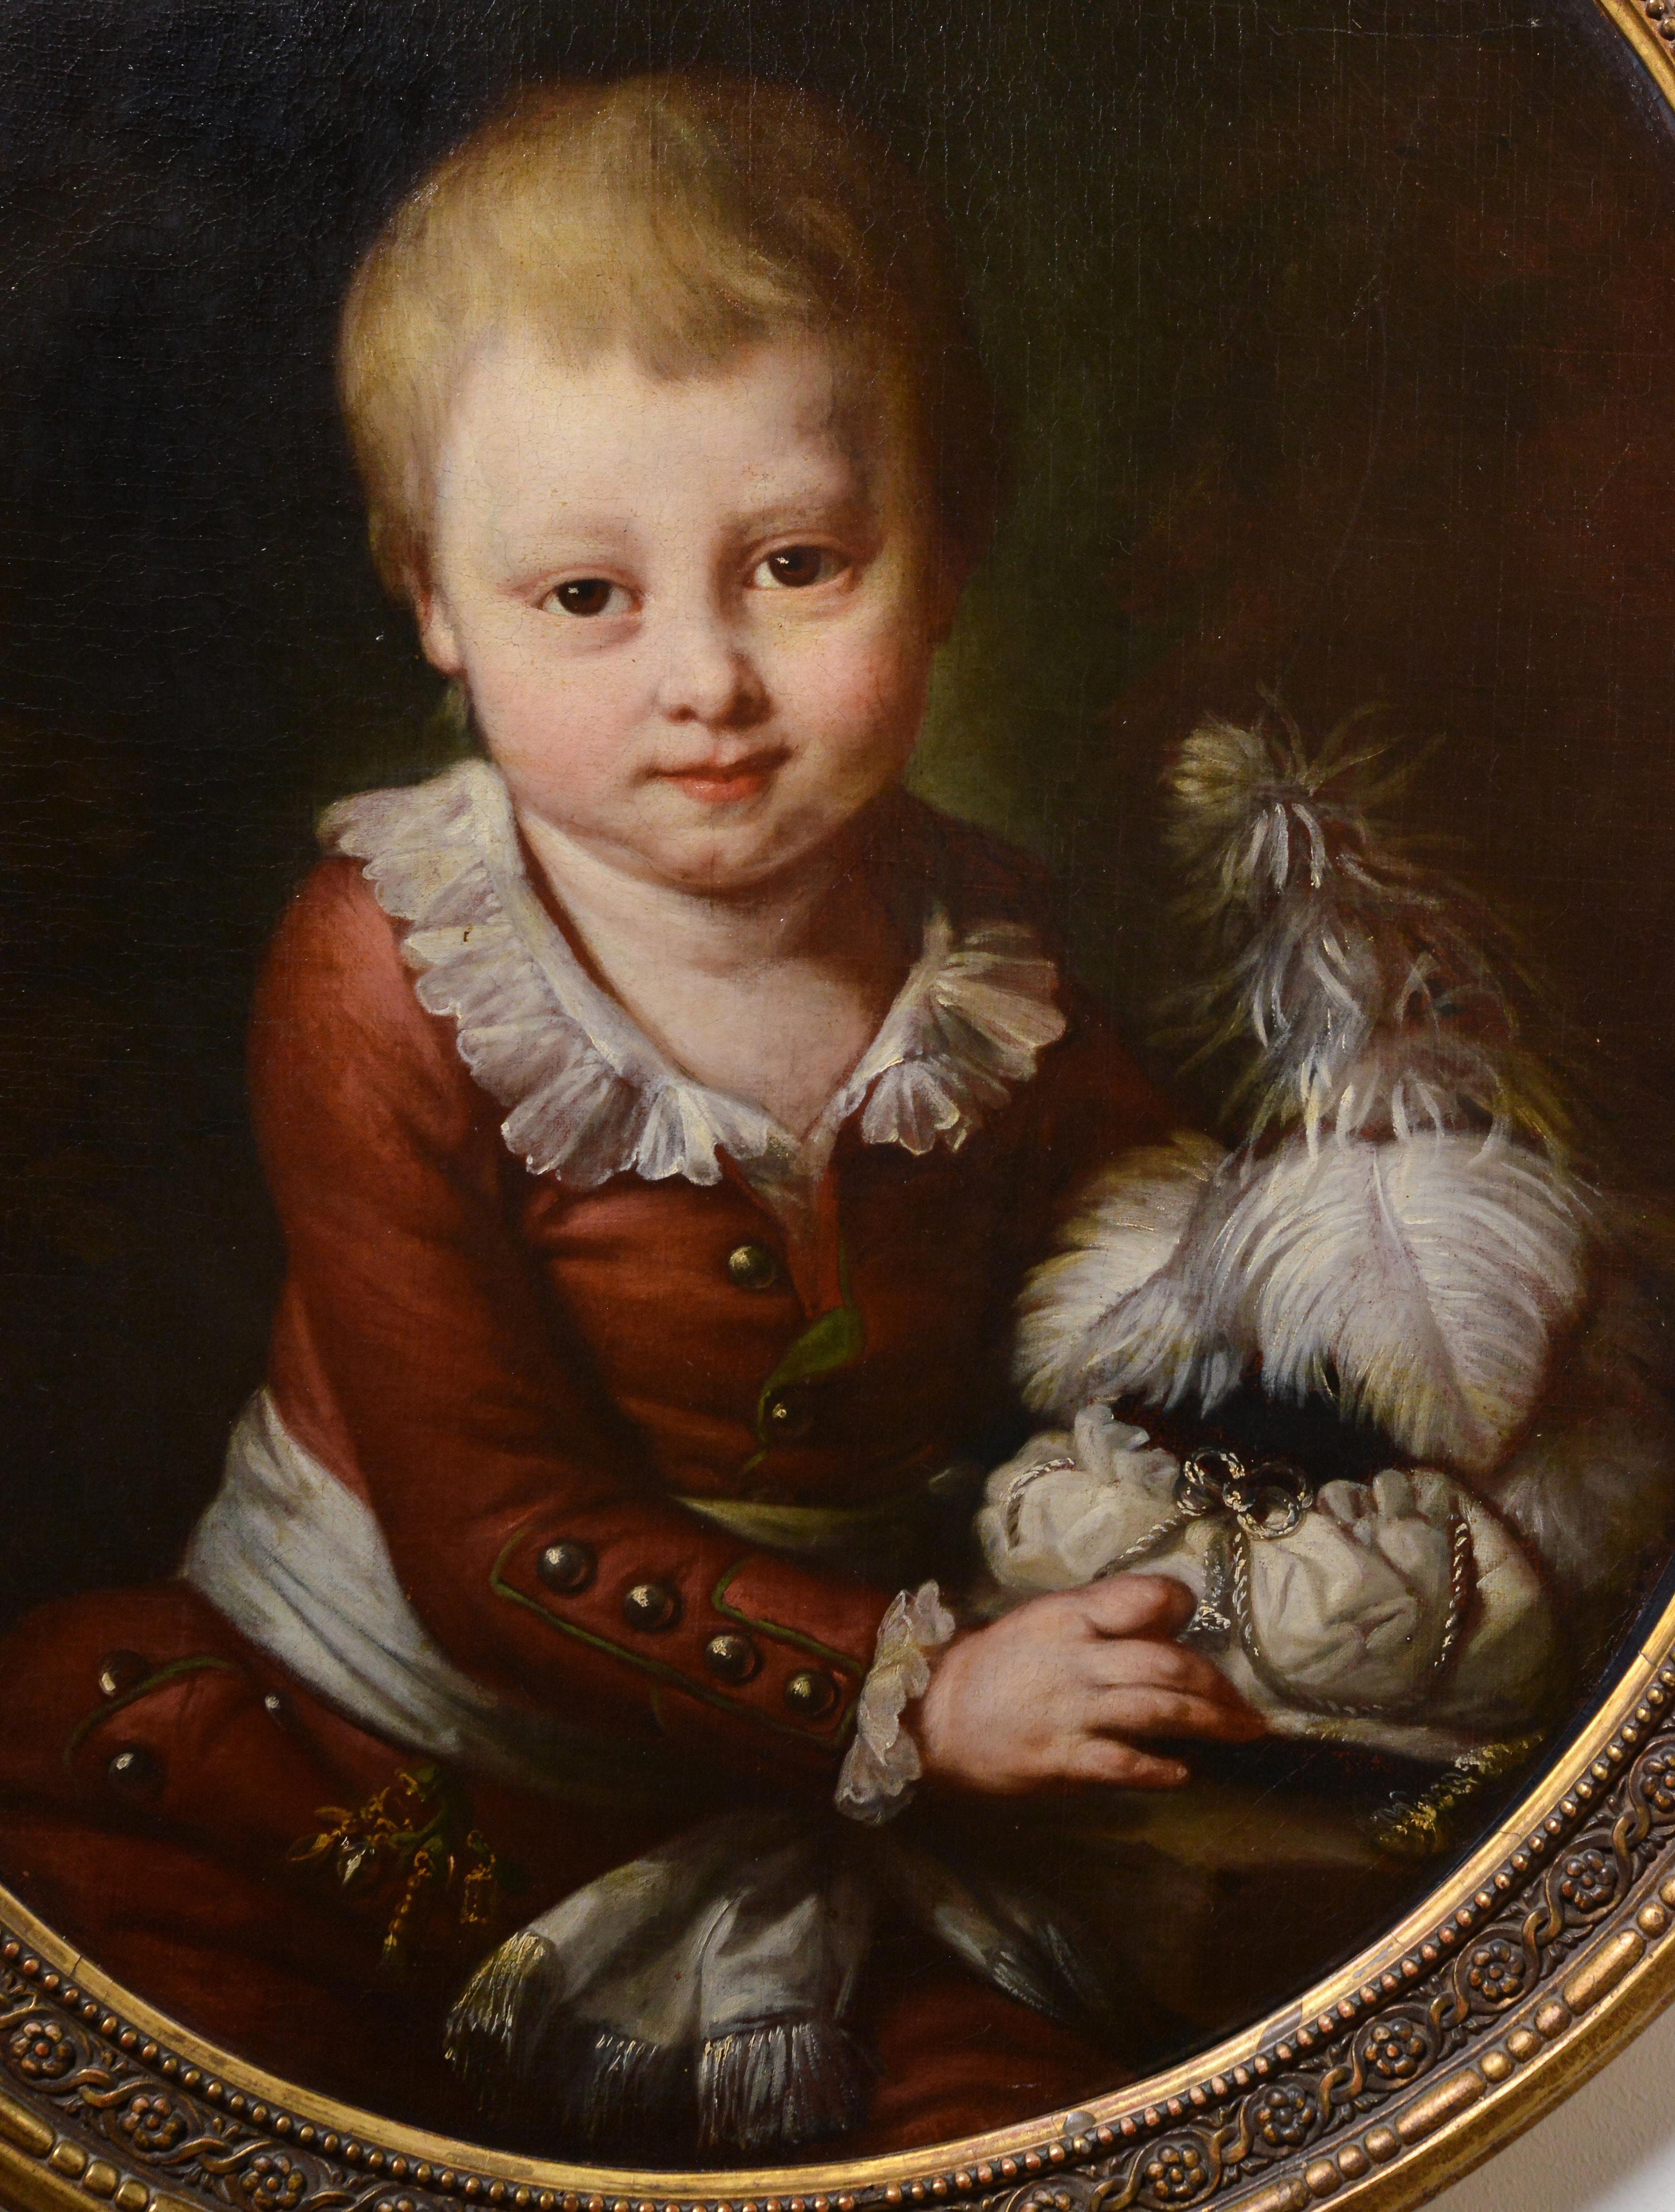 The portrait is attributed to the French painter Monique Daniche (1737 - 1824)
Magnificently painted baroque portrait of unidentified noble child wearing fashionable dress and holding his oriental style hat with rich plumage and trustingly facing.